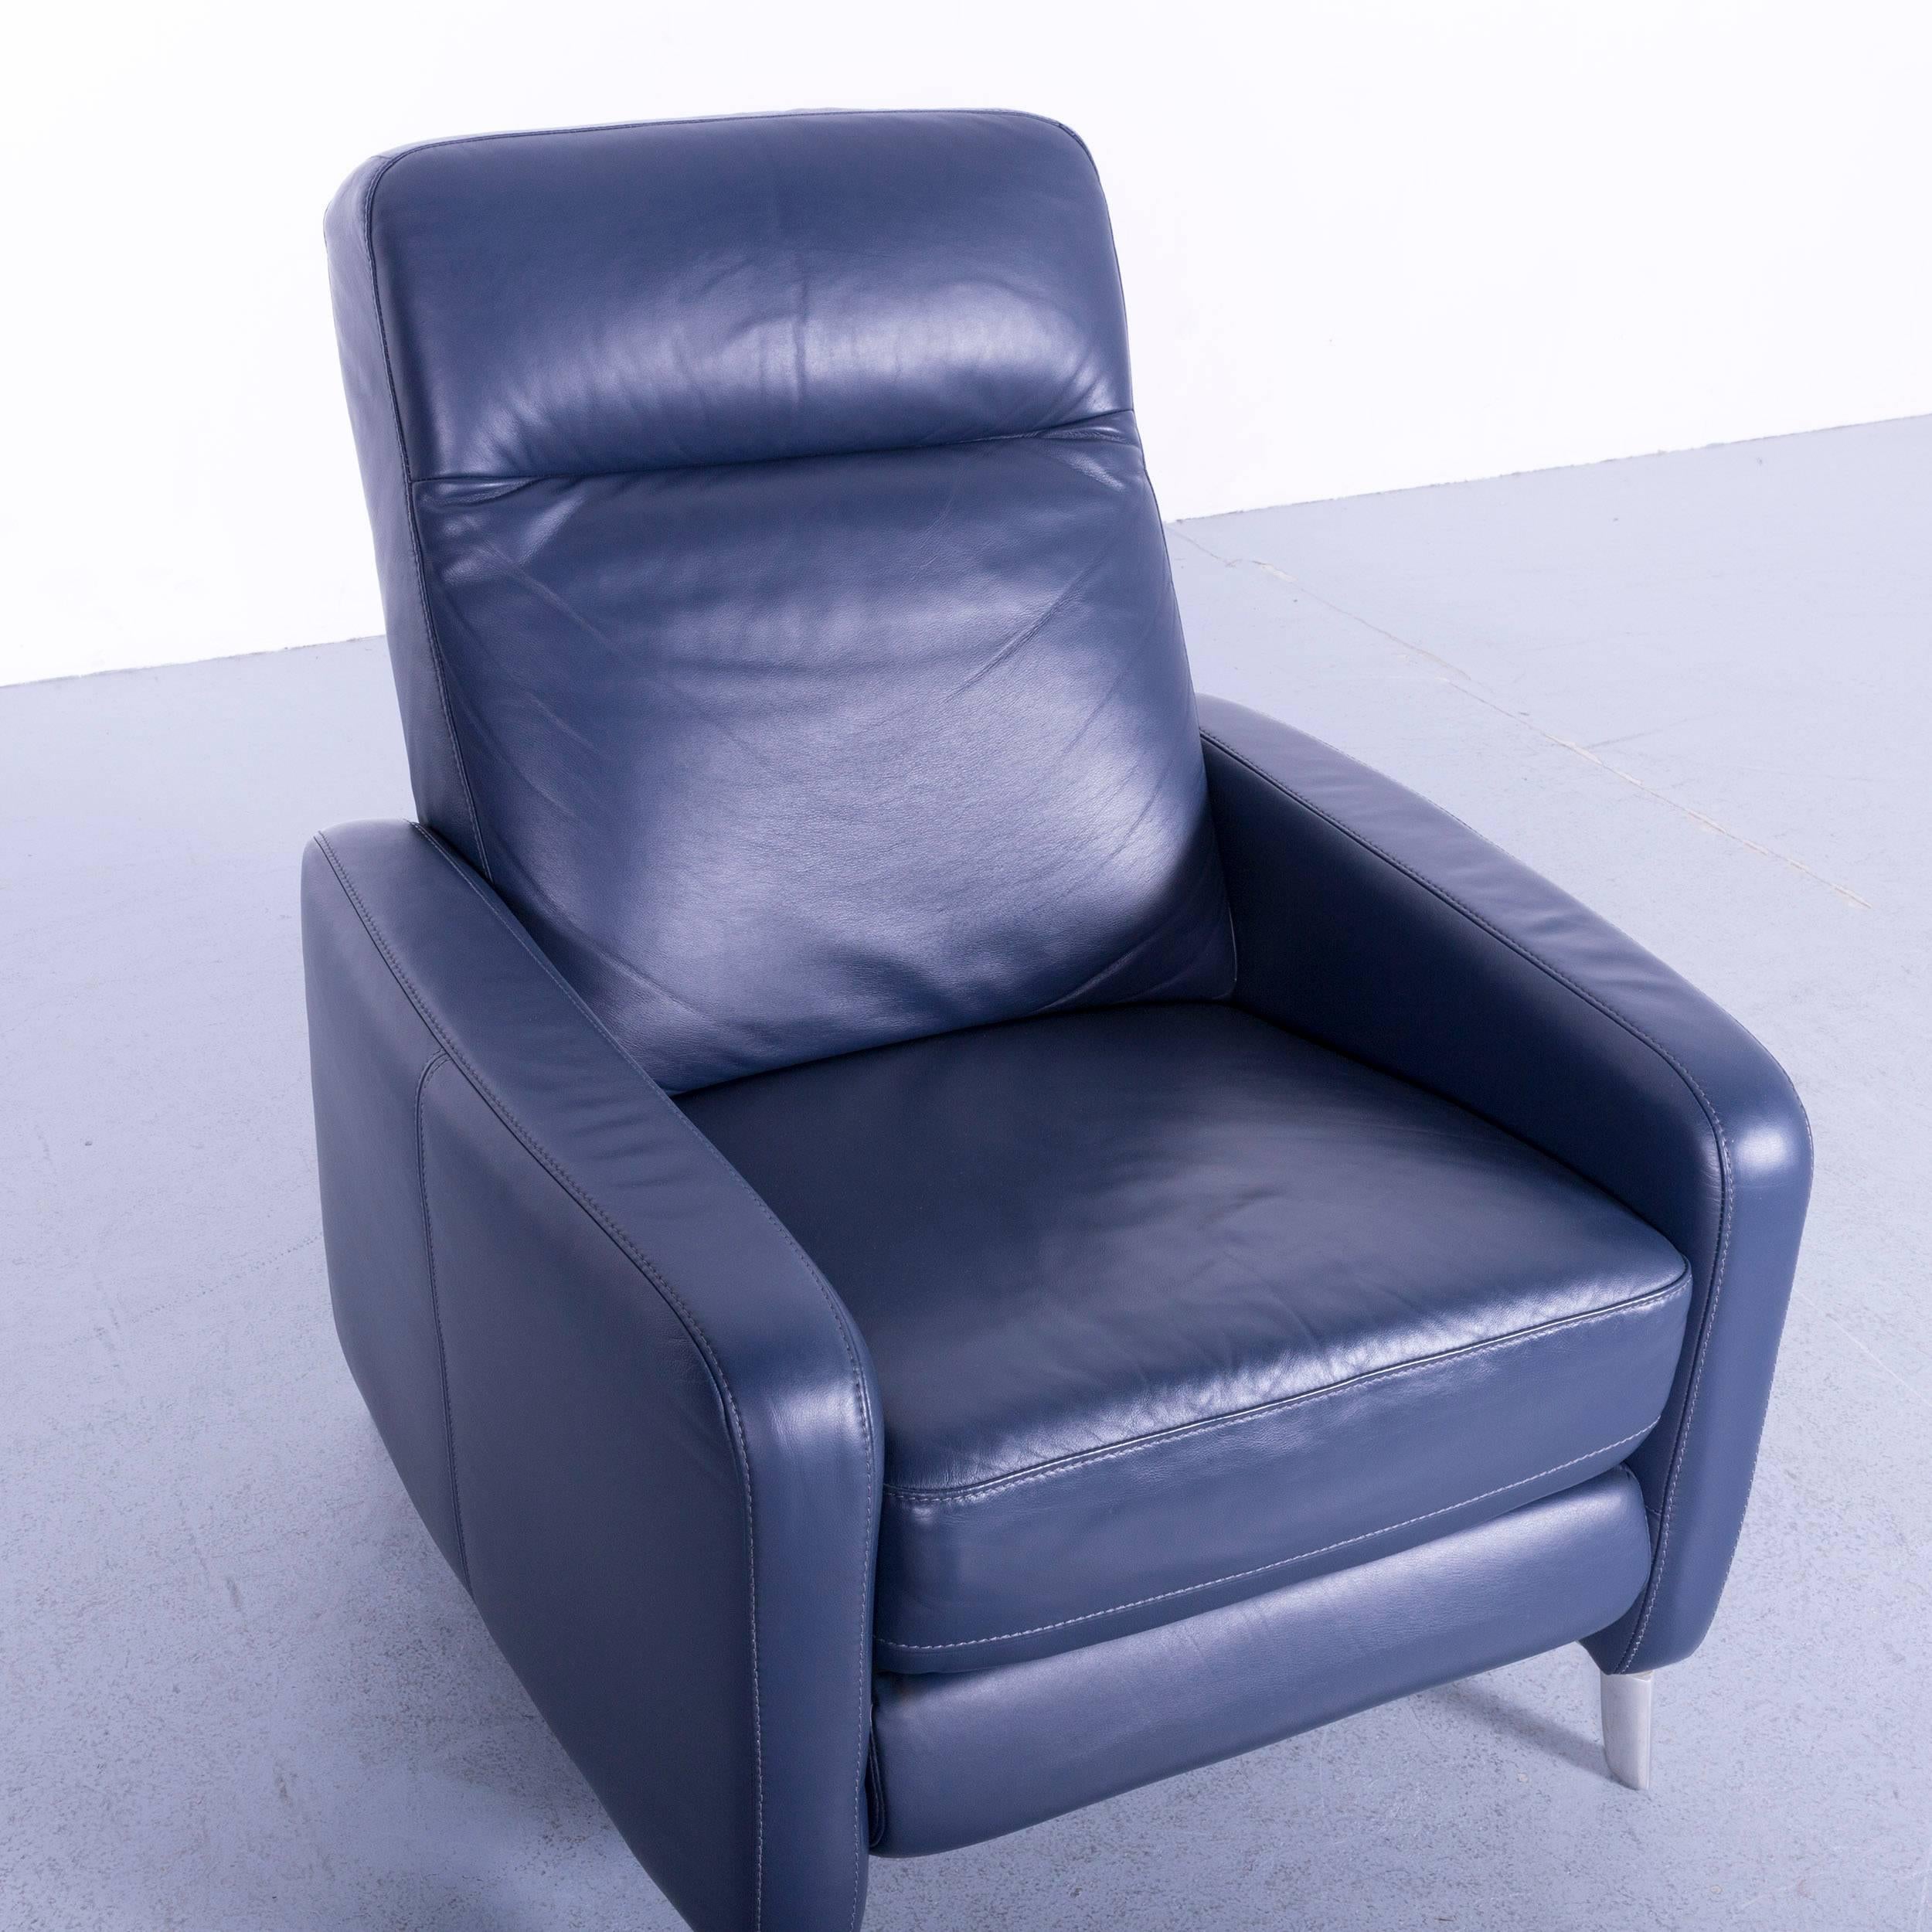 Musterring Leather Armchair Blue One-Seat Recliner 2